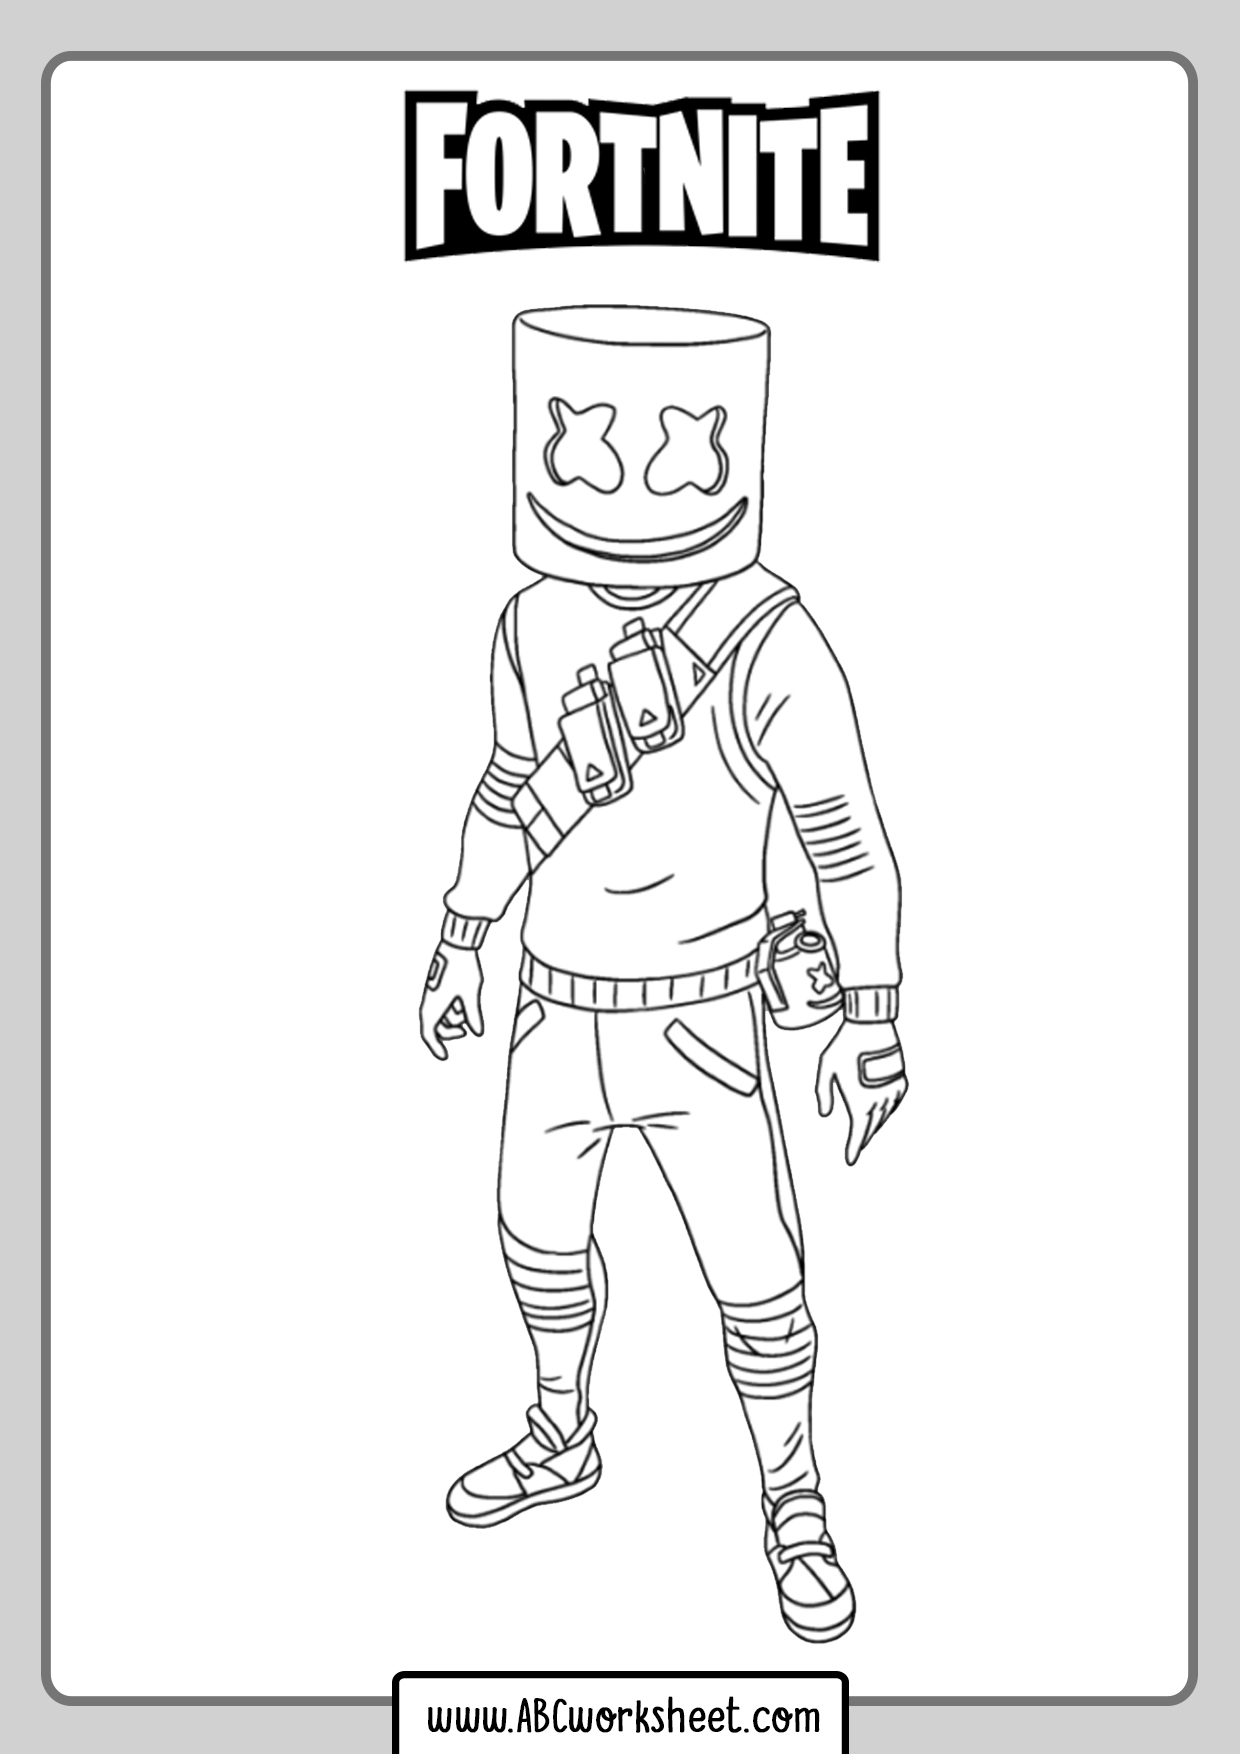 fortnite-coloring-pages